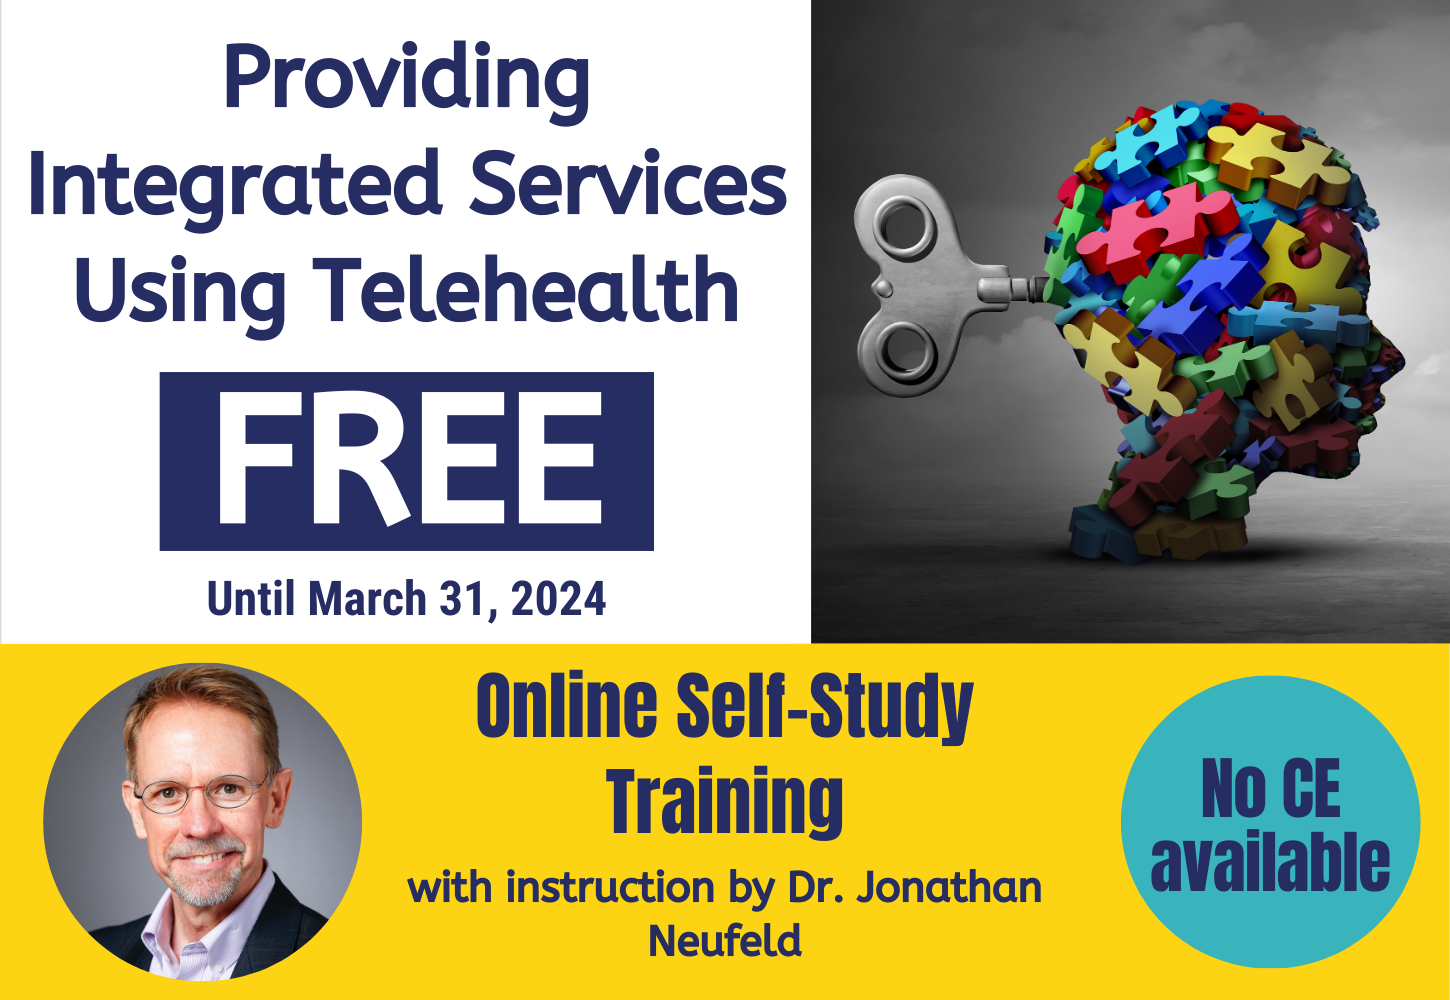 Providing Integrated Services Using Telehealth